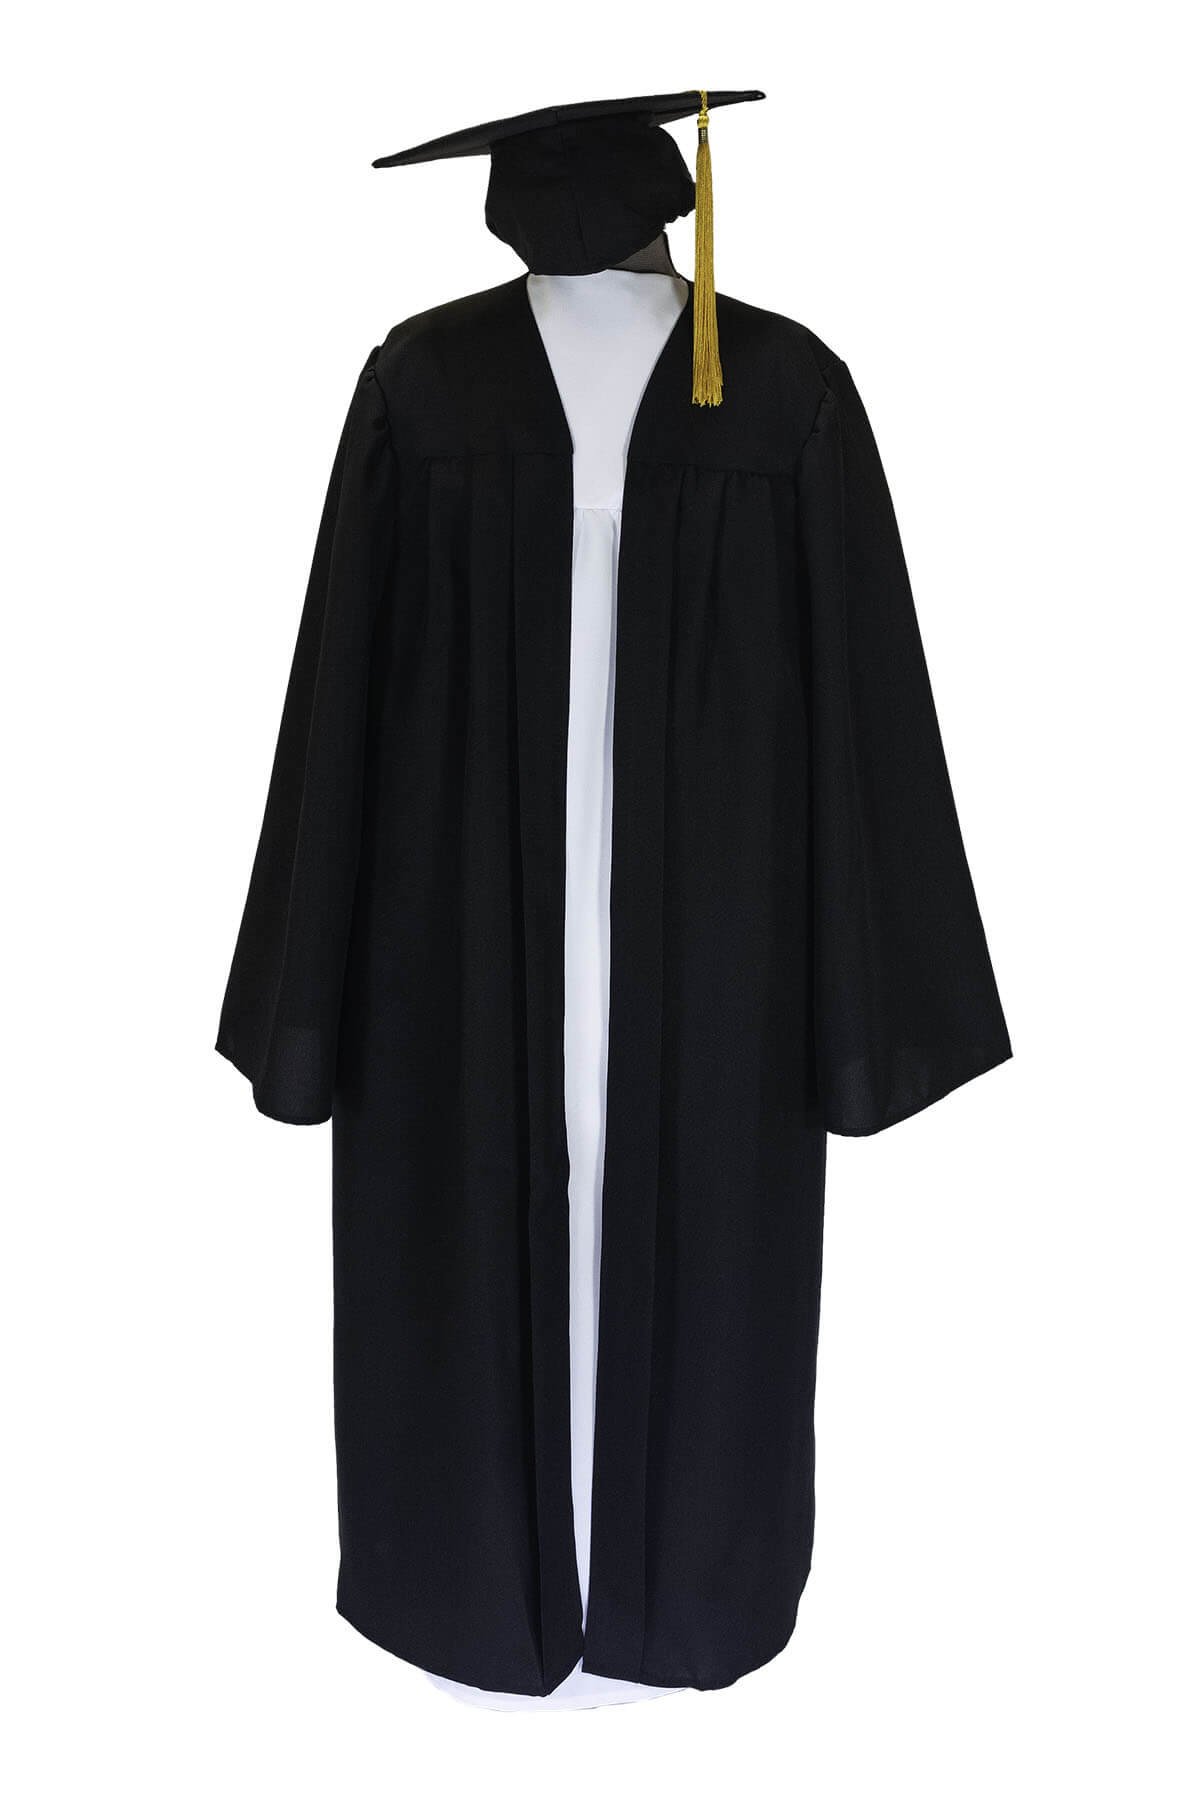 Pink Matte Graduation Gown and Cap in Srinagar at best price by Mera  Convocation - Justdial